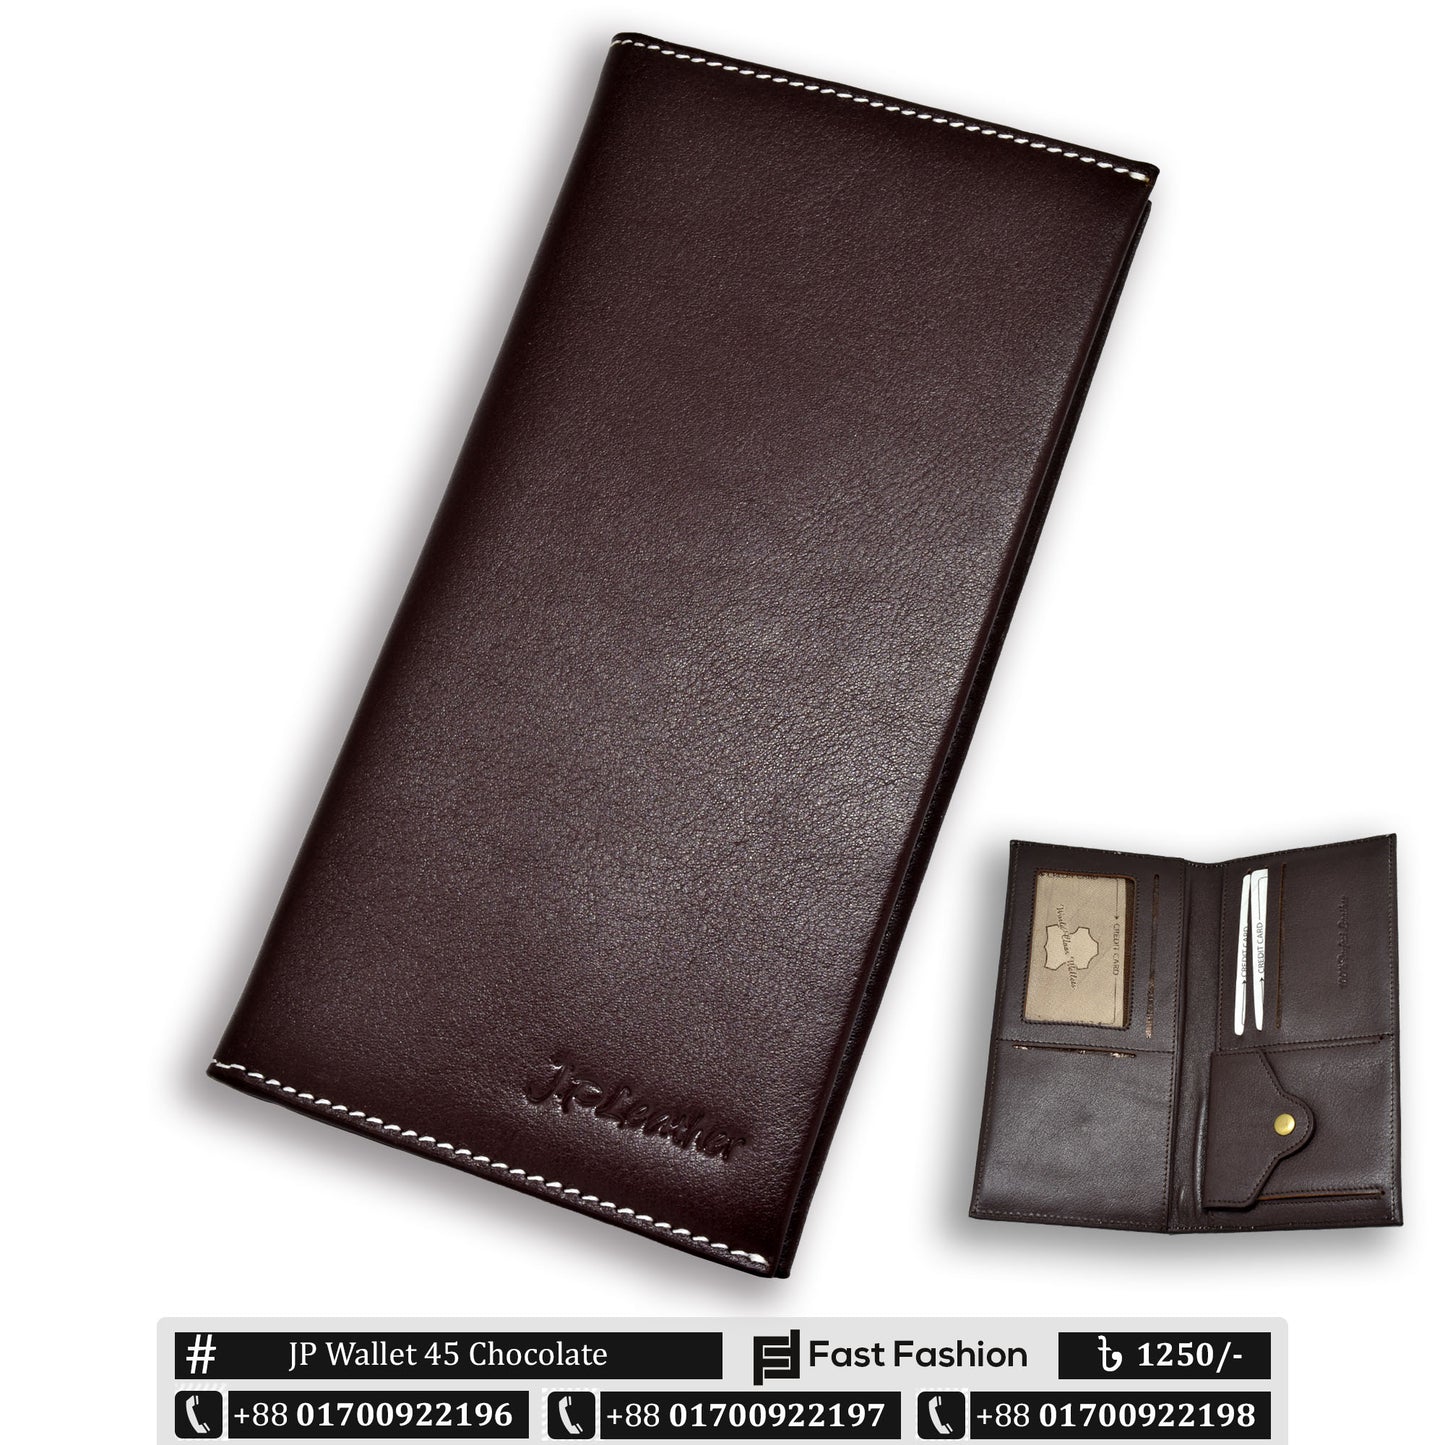 Long Chocolate Color Premium Leather Wallet for Men | JP Wallet 45 Chocolate